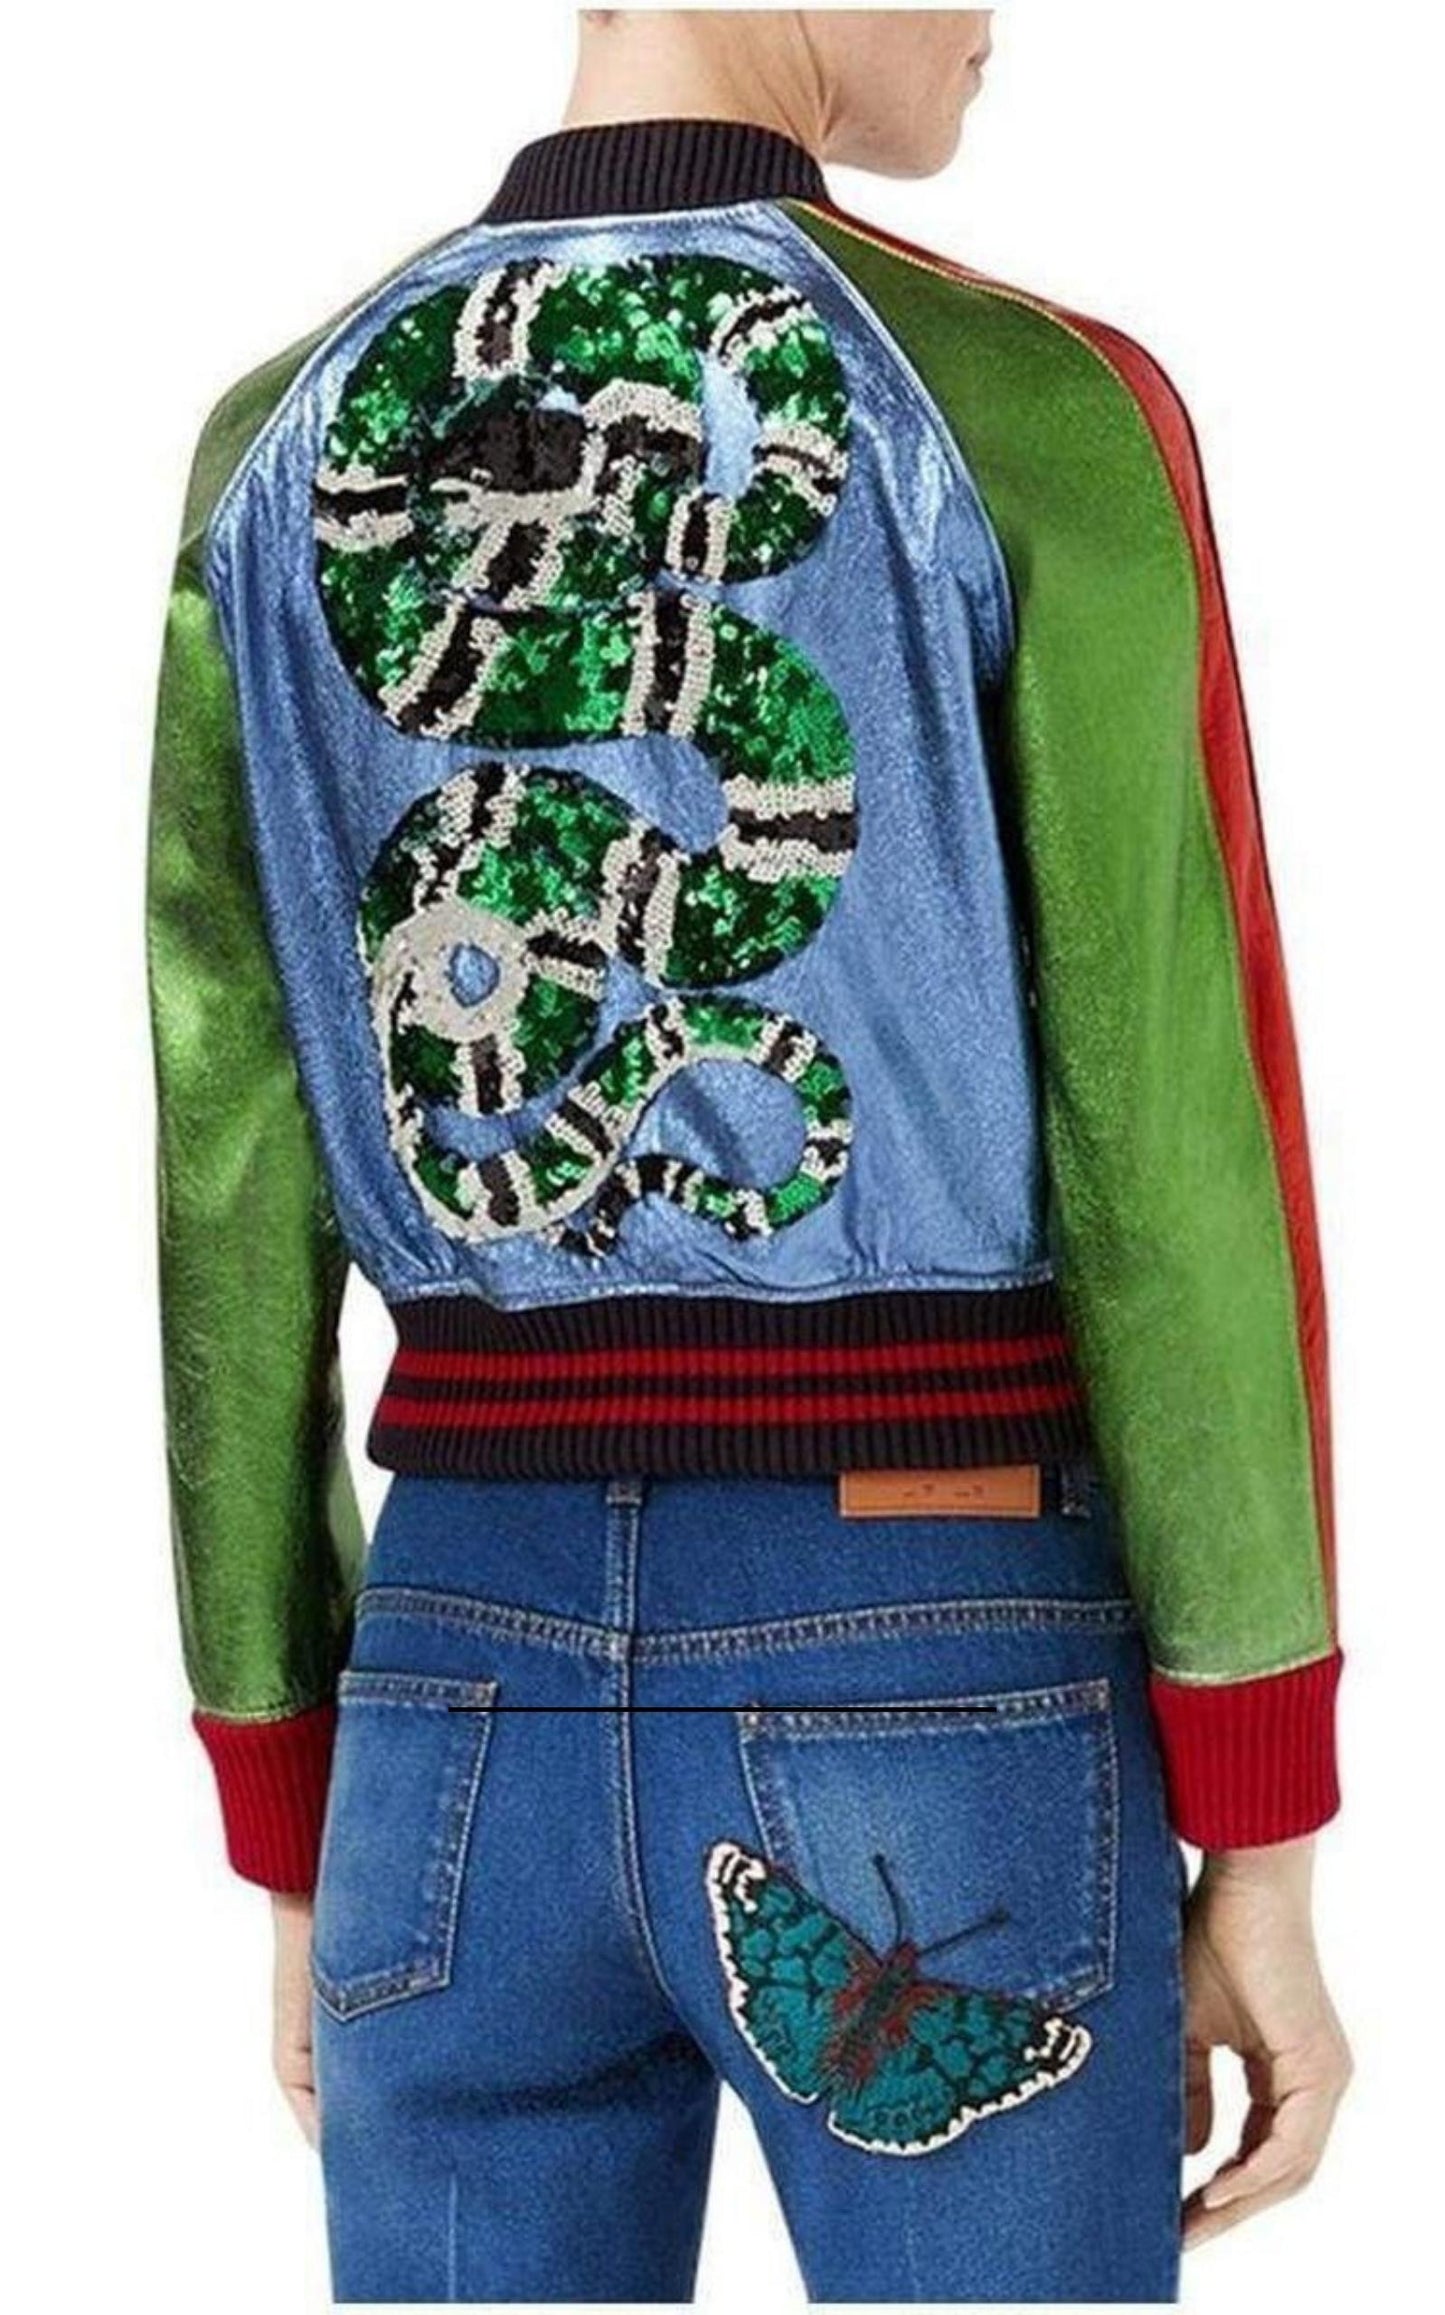  GucciBee & Butterfly Patches Jeans - Runway Catalog